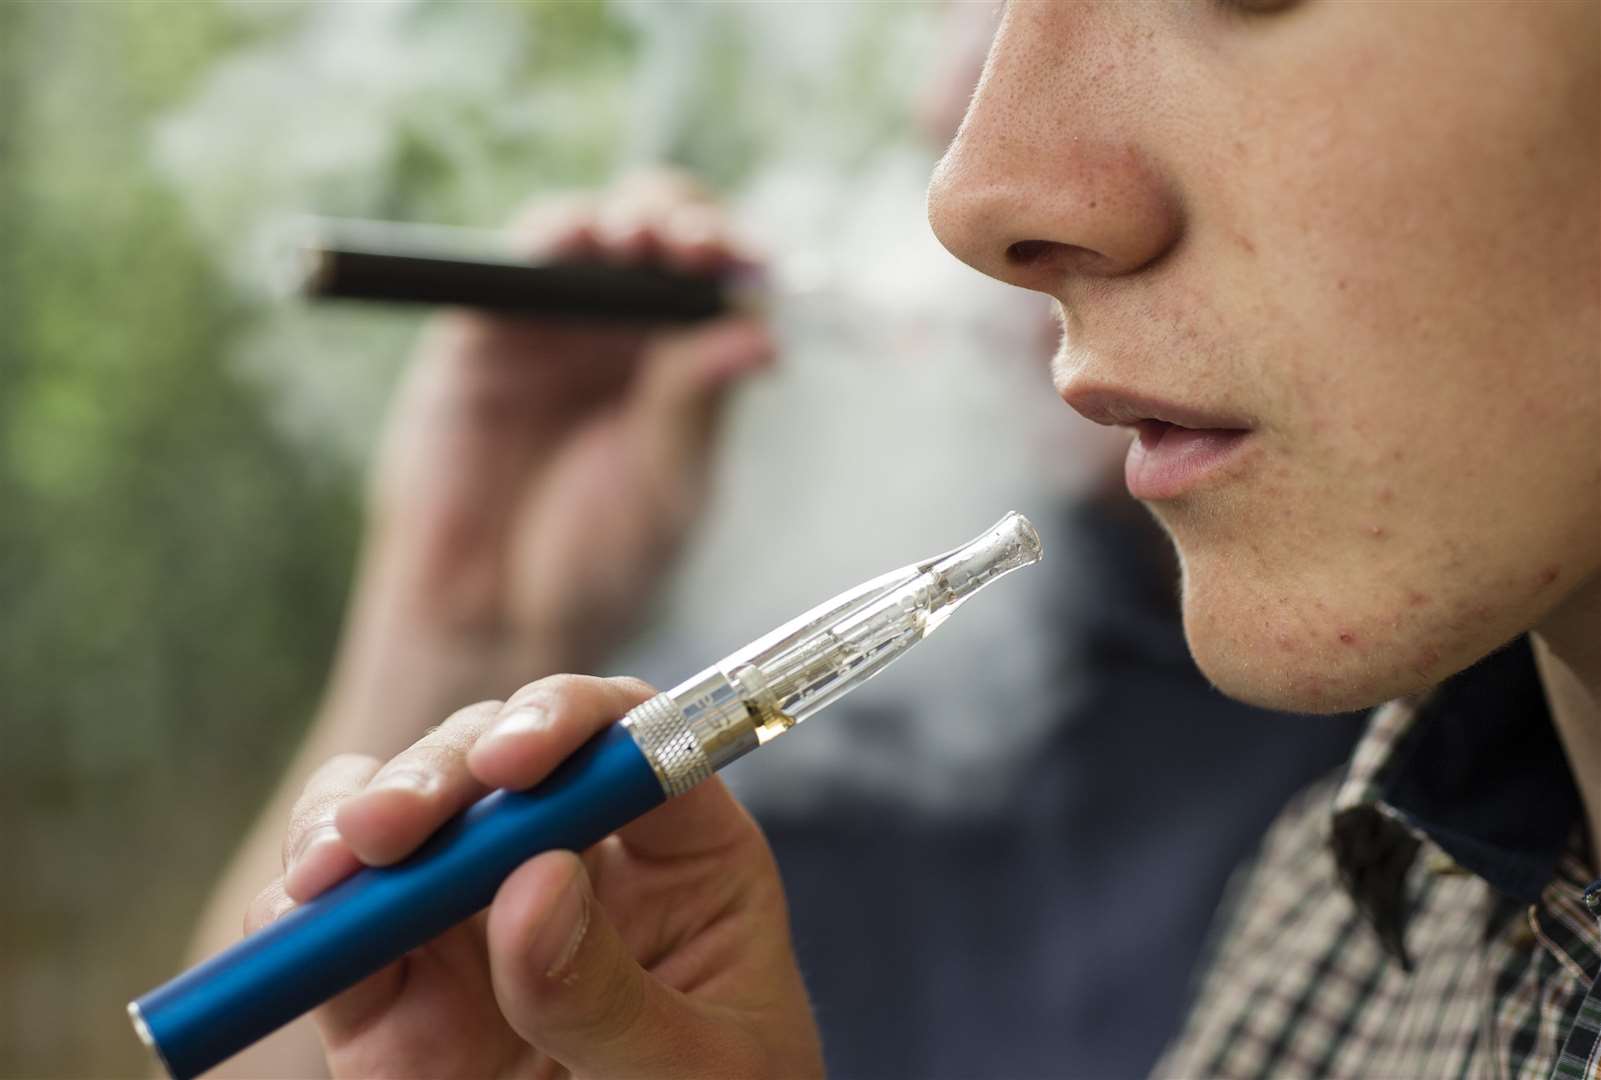 There are fears vapes are damaging children’s health. Picture: Stock image